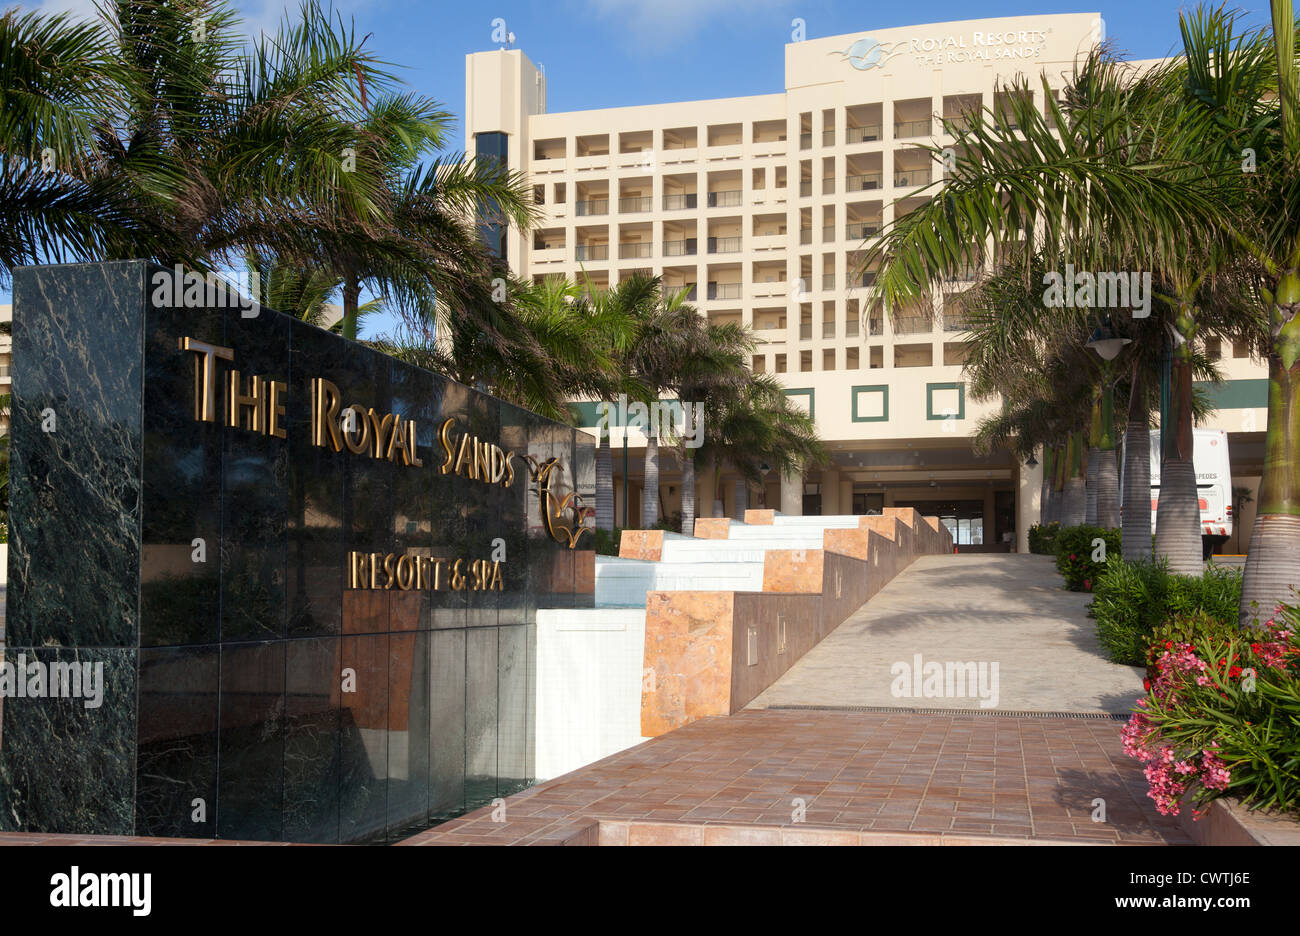 The Royal Sands Hotel & Spa Cancun, Mexico Stock Photo